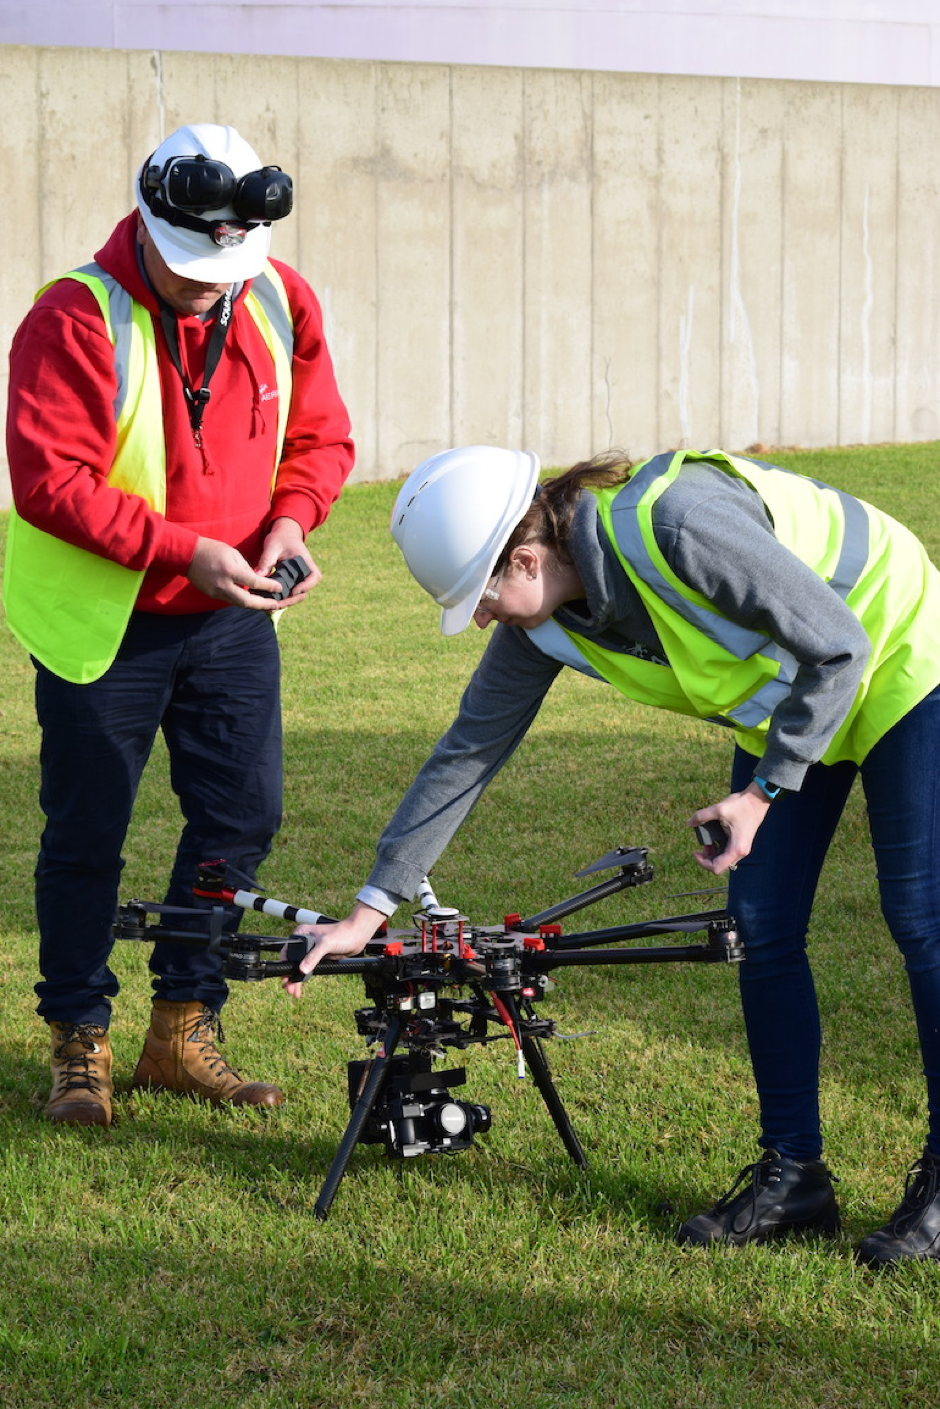 A drone is fitted with a camera, ready to capture aerial footage and photographs.